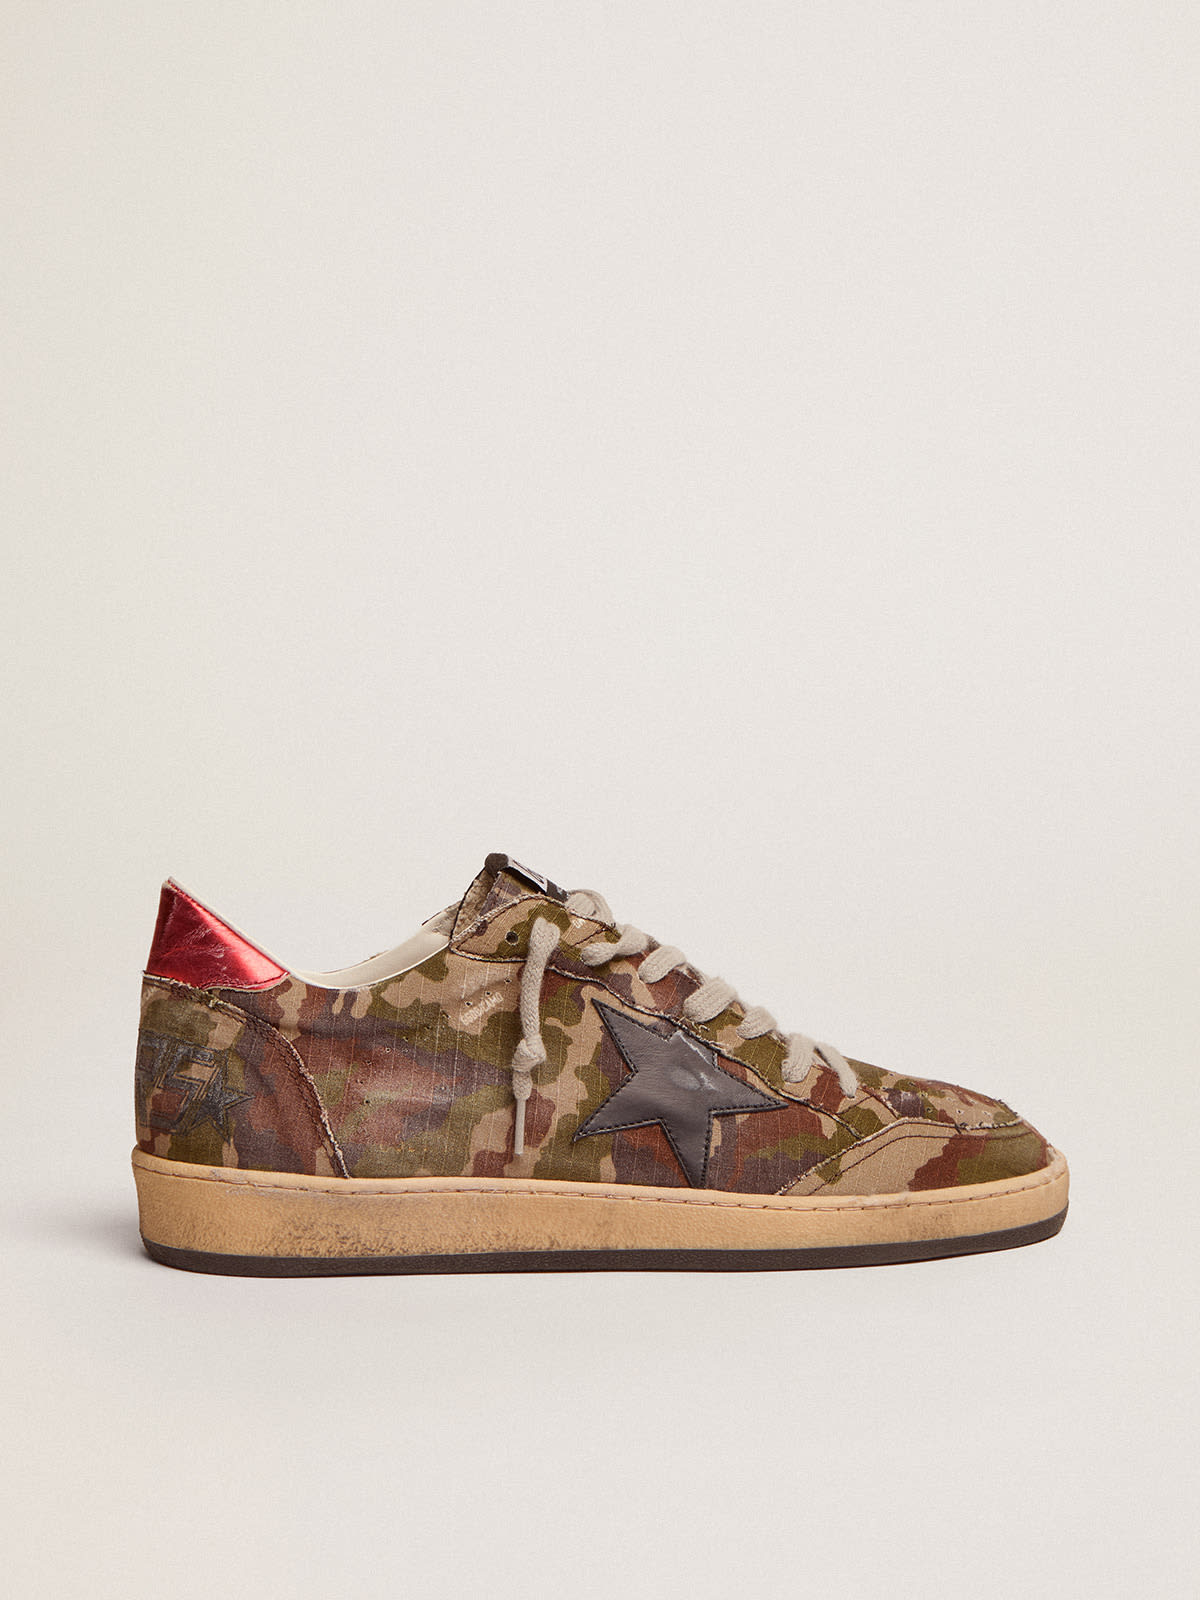 Golden Goose - Men's Ball Star in camouflage ripstop fabric with blue star in 